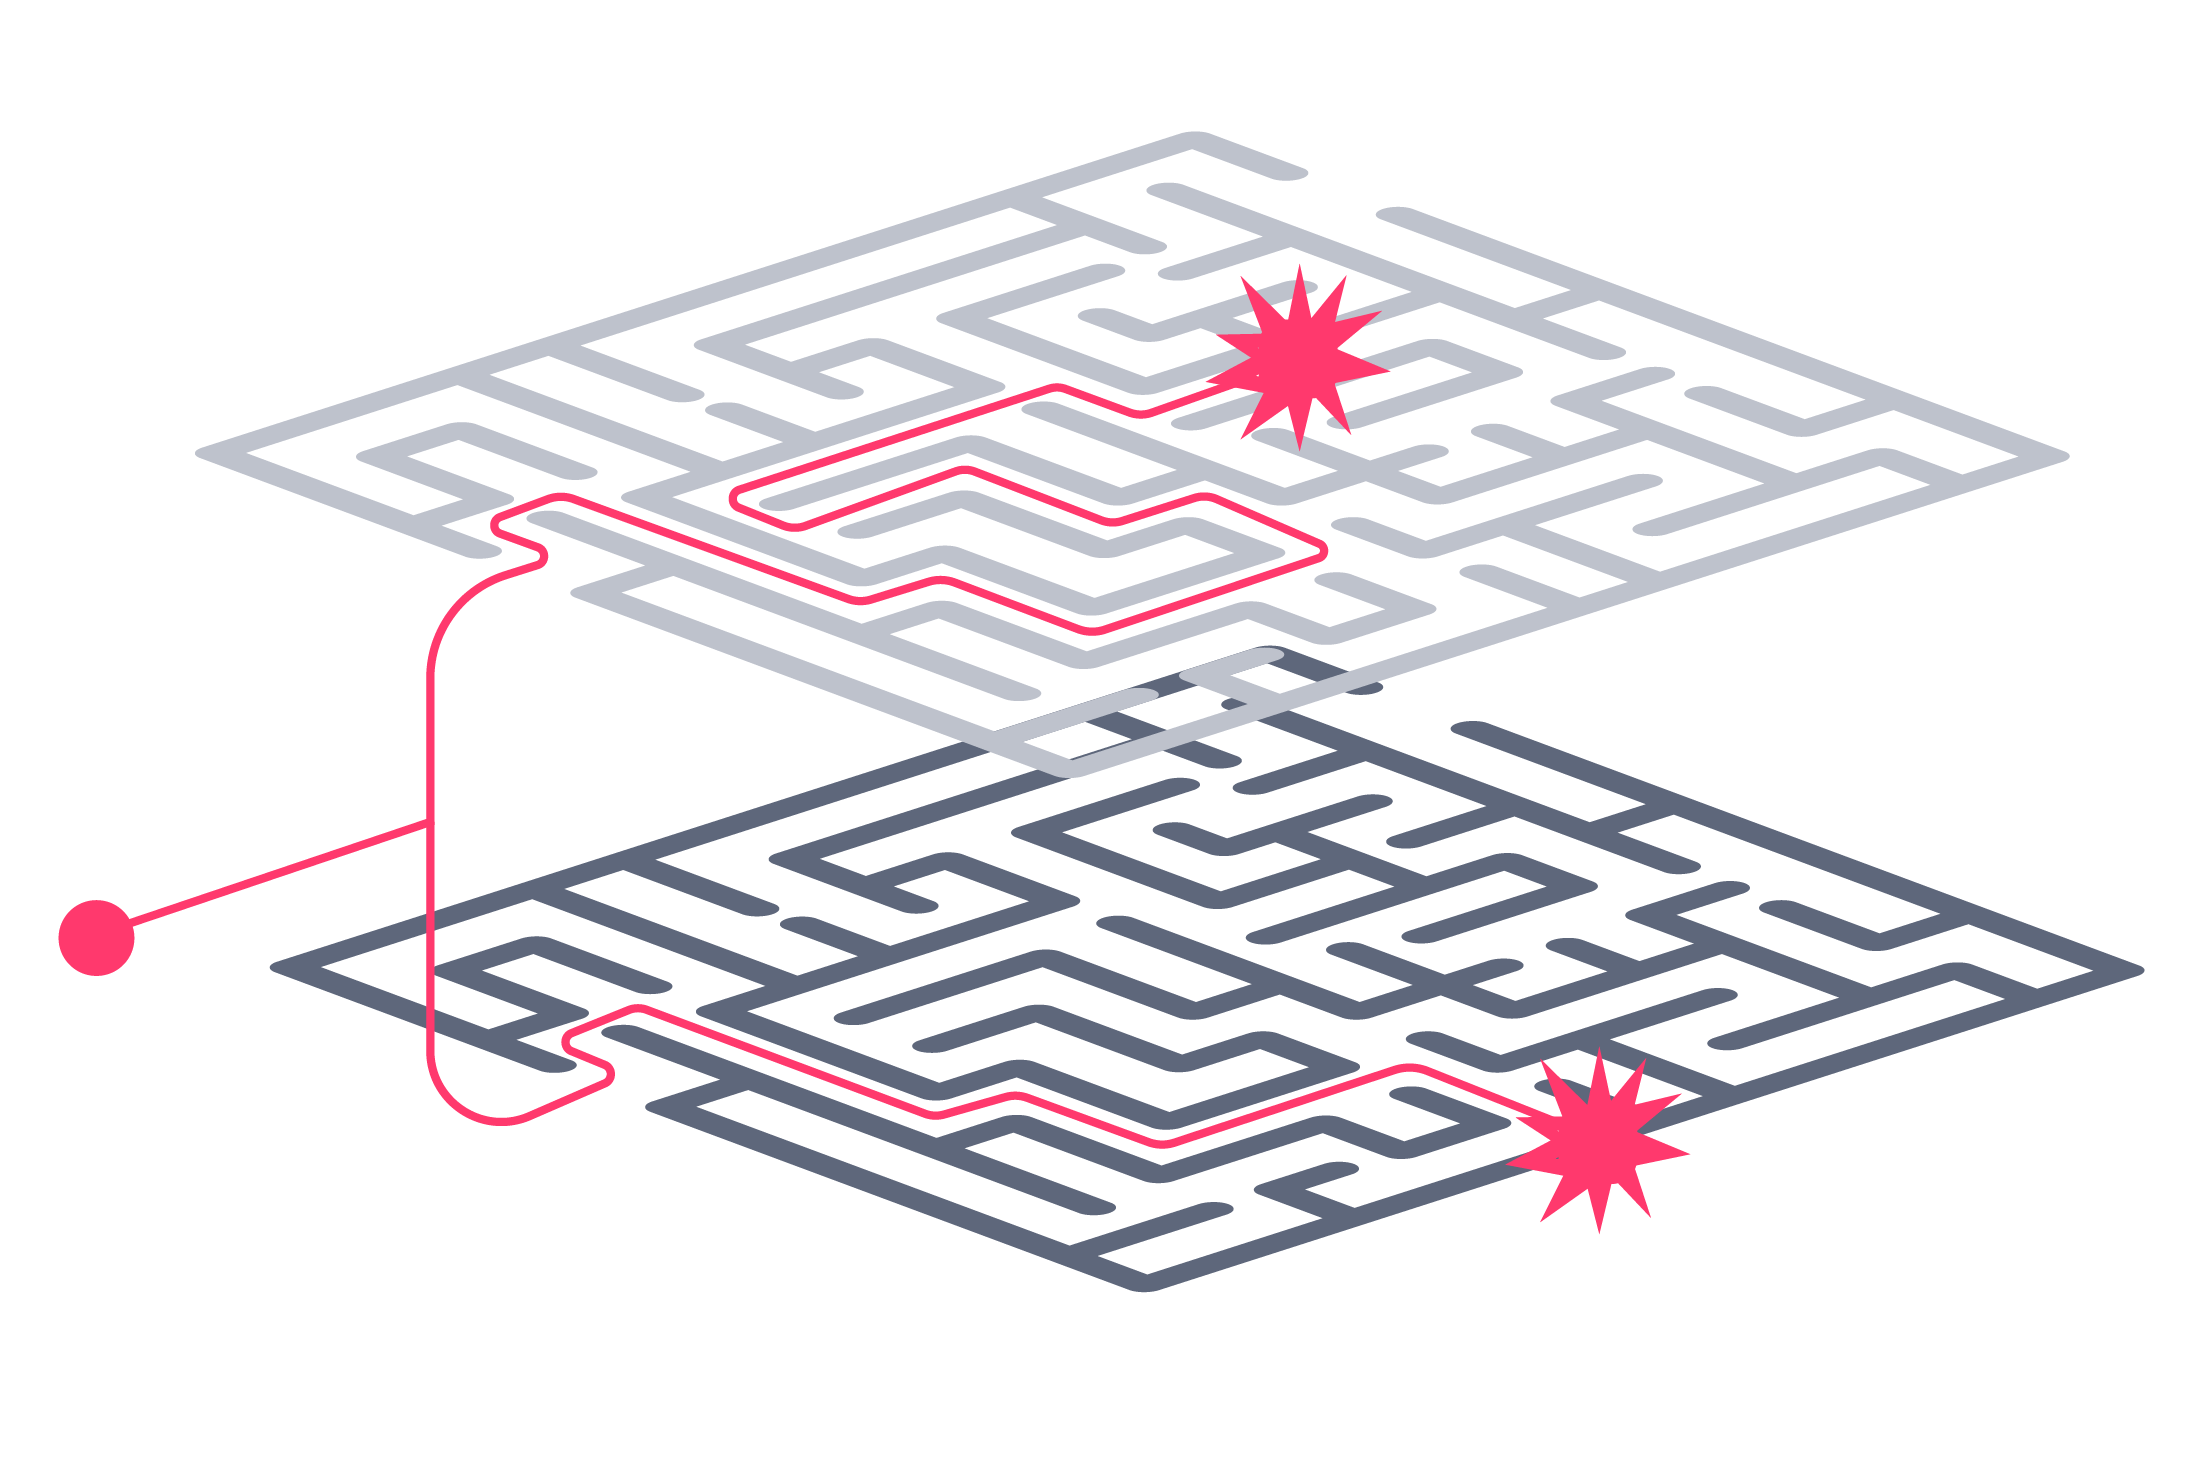 Sales teams simultaneously navigate complex customer and organization mazes.